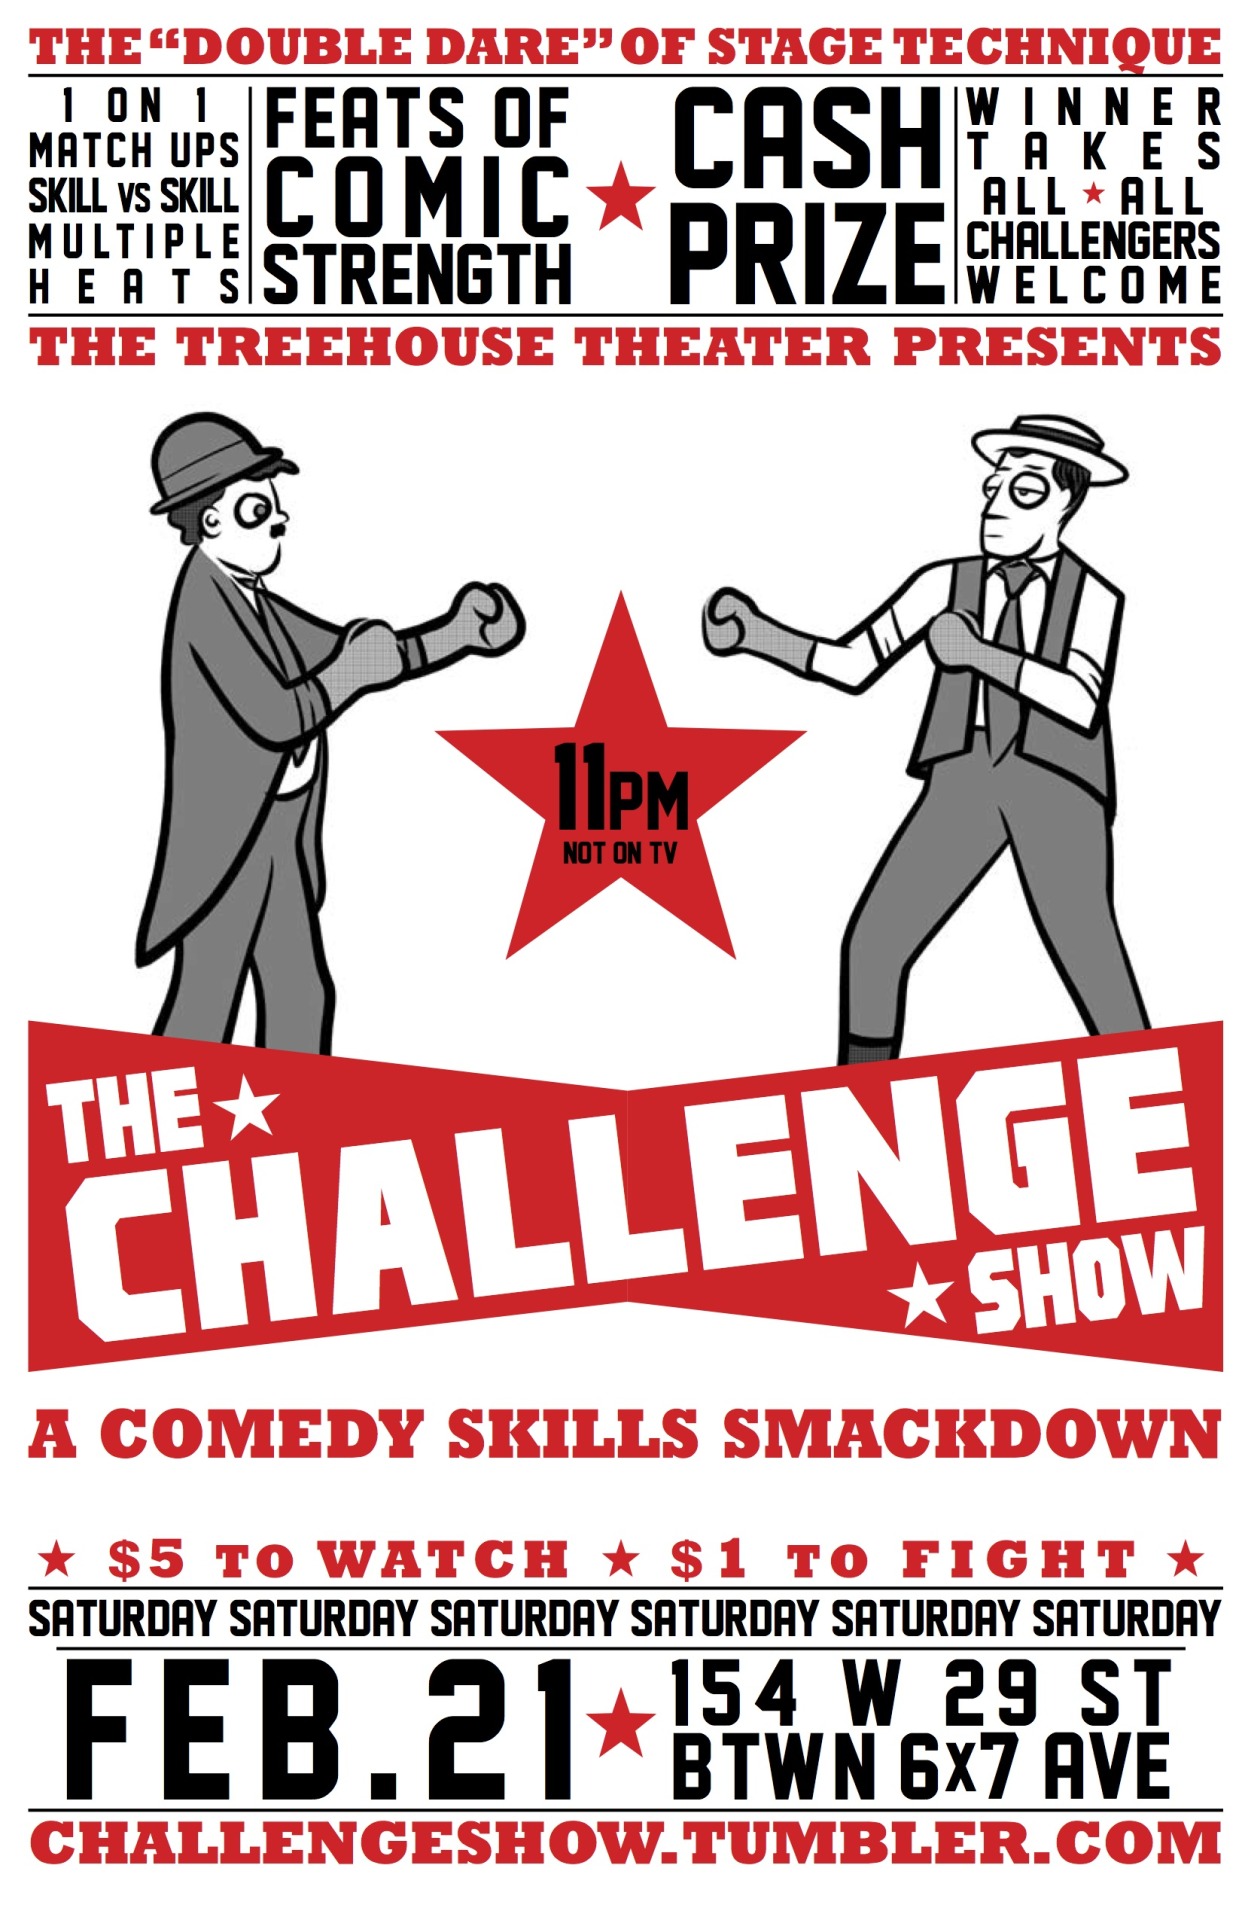 challengeshow:
“ FEBRUARY SHOW WILL BE A CHARACTER OFF!
Bring your best, worst, silly and perfect Characters & Impressions.
COME WIN MONEYYYYY!!!!!
”